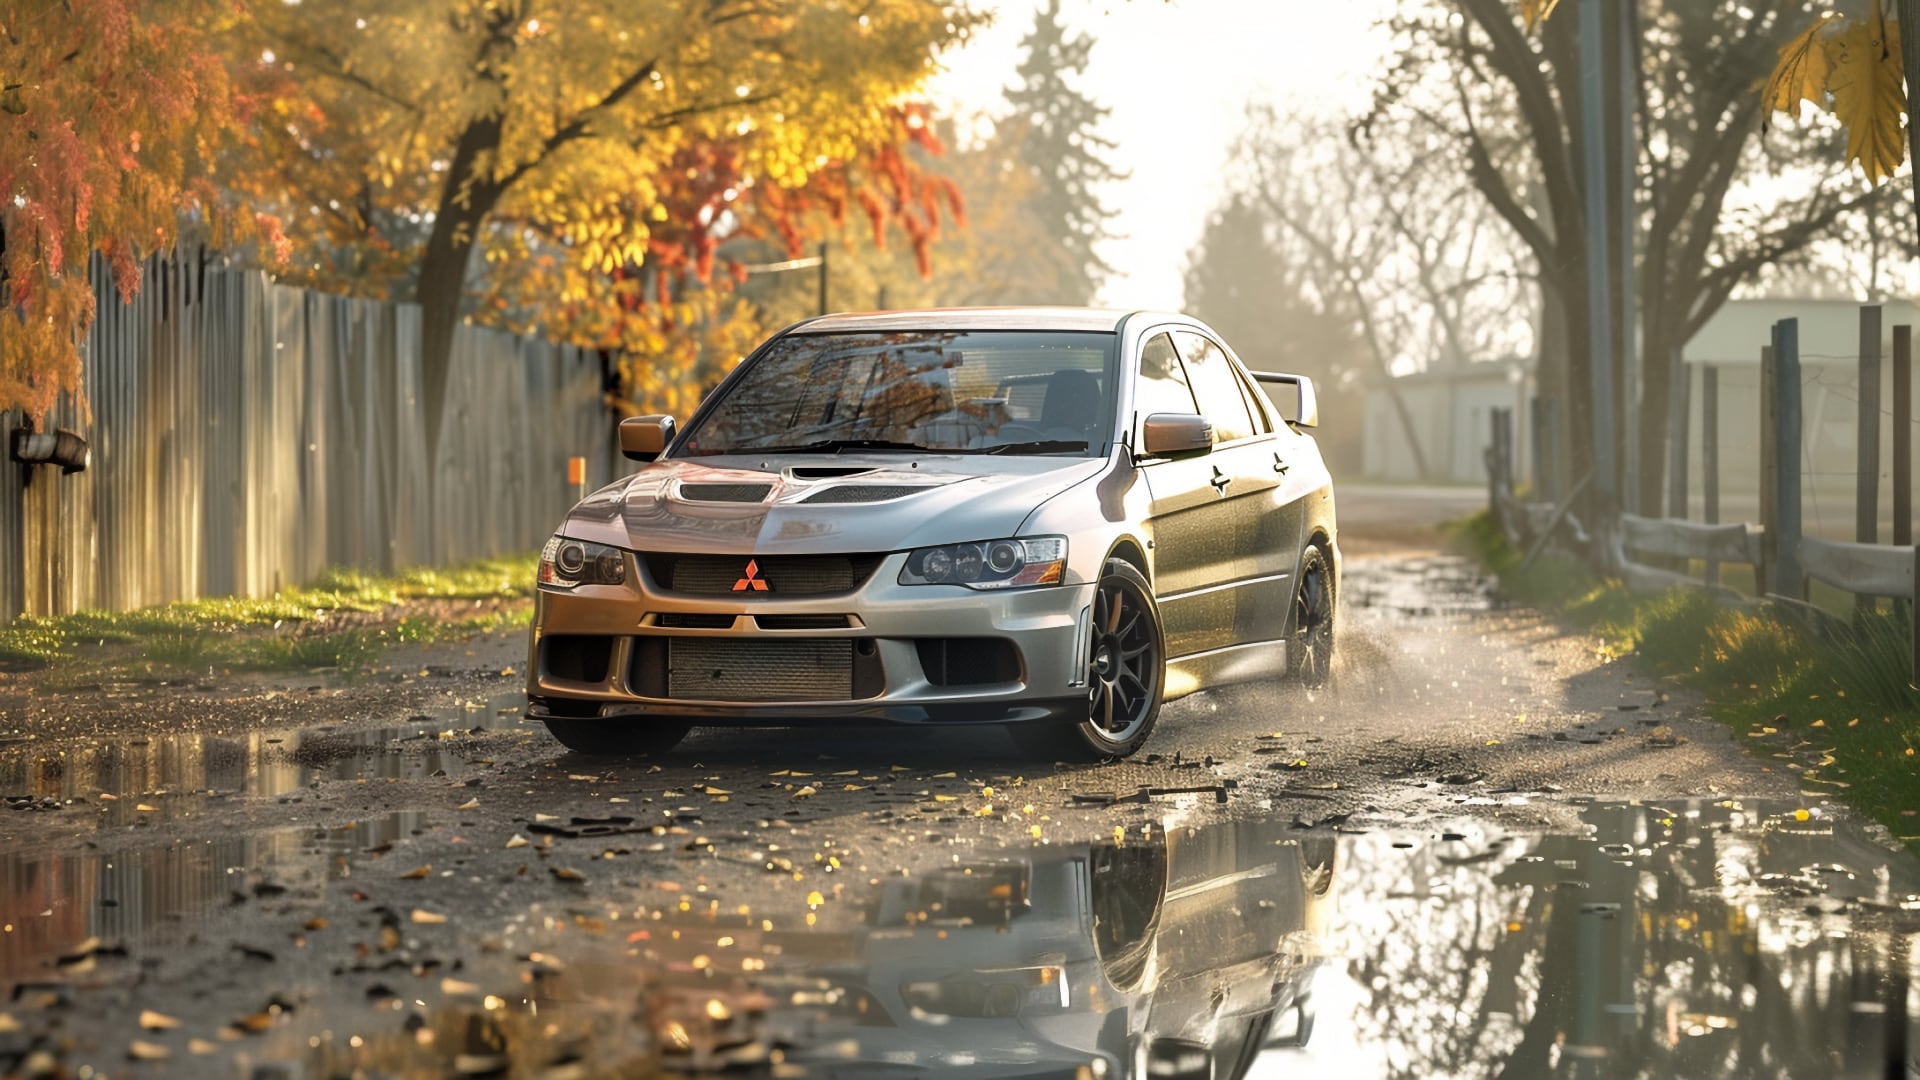 A silver Mitsubishi Lancer driving down a muddy road in autumn.